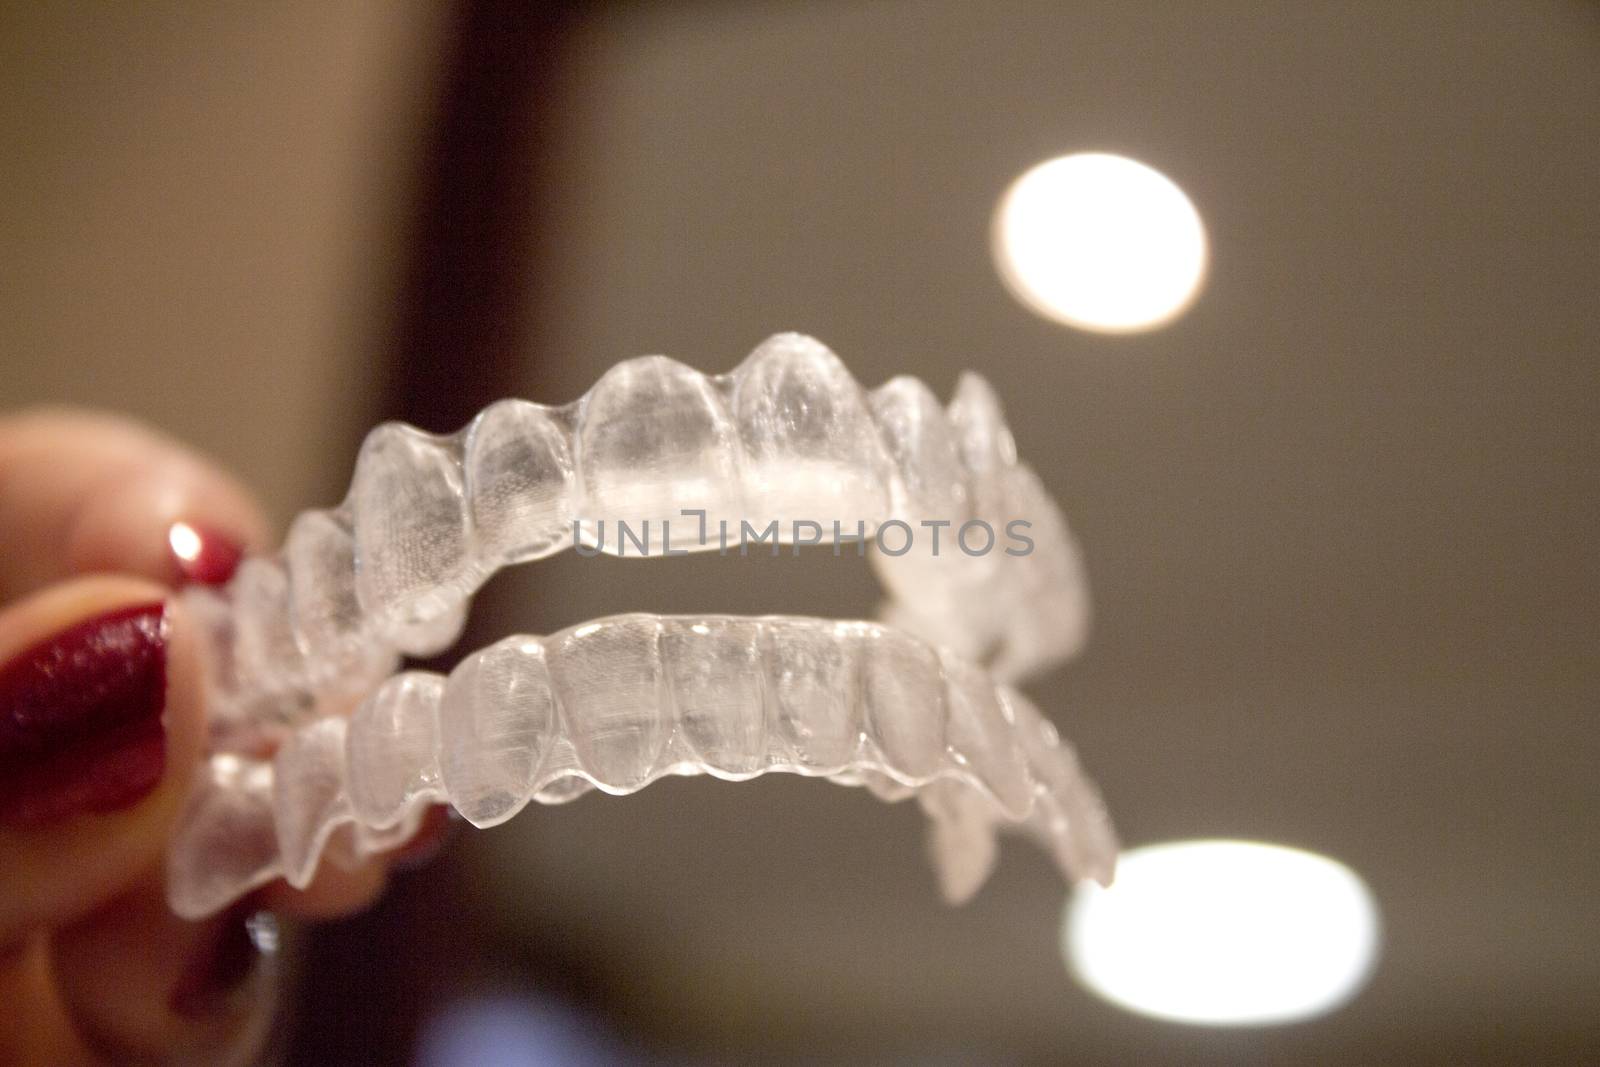 Invisible orthodontics for aligning teeth